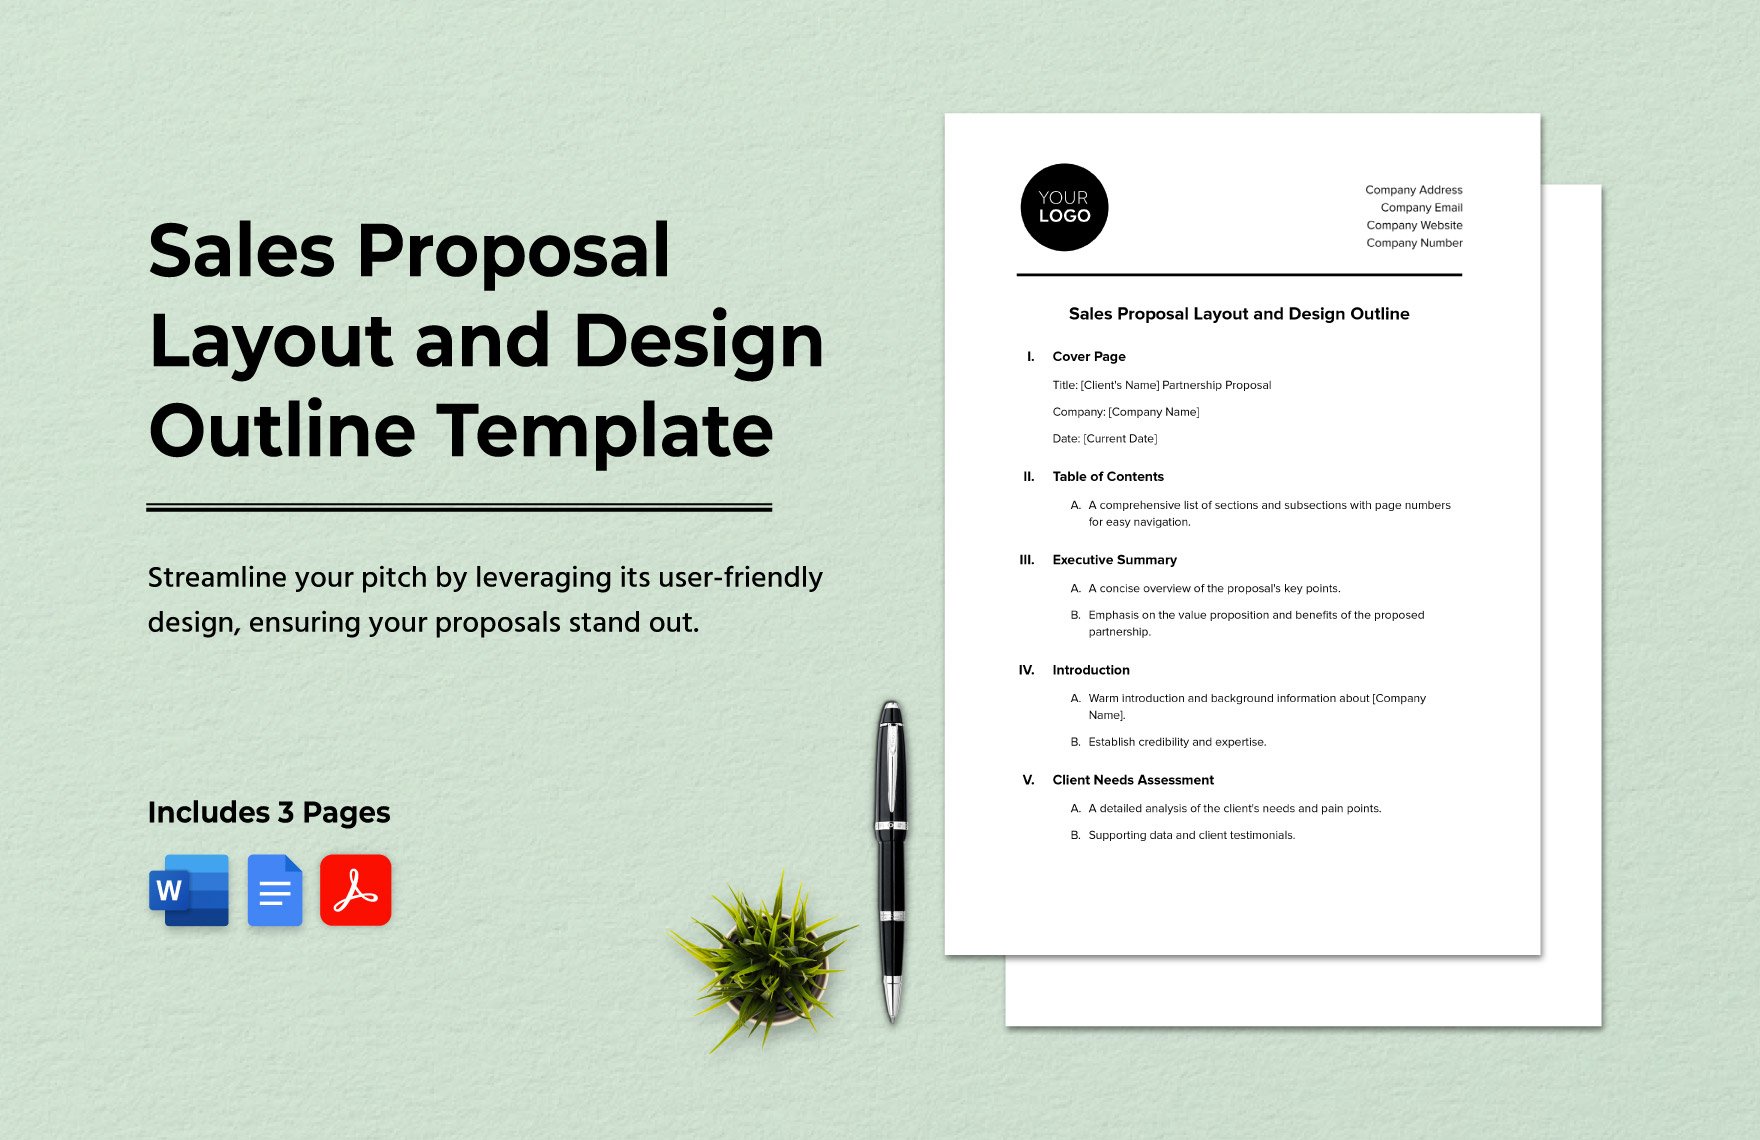 Sales Proposal Layout and Design Outline Template in Word, Google Docs, PDF